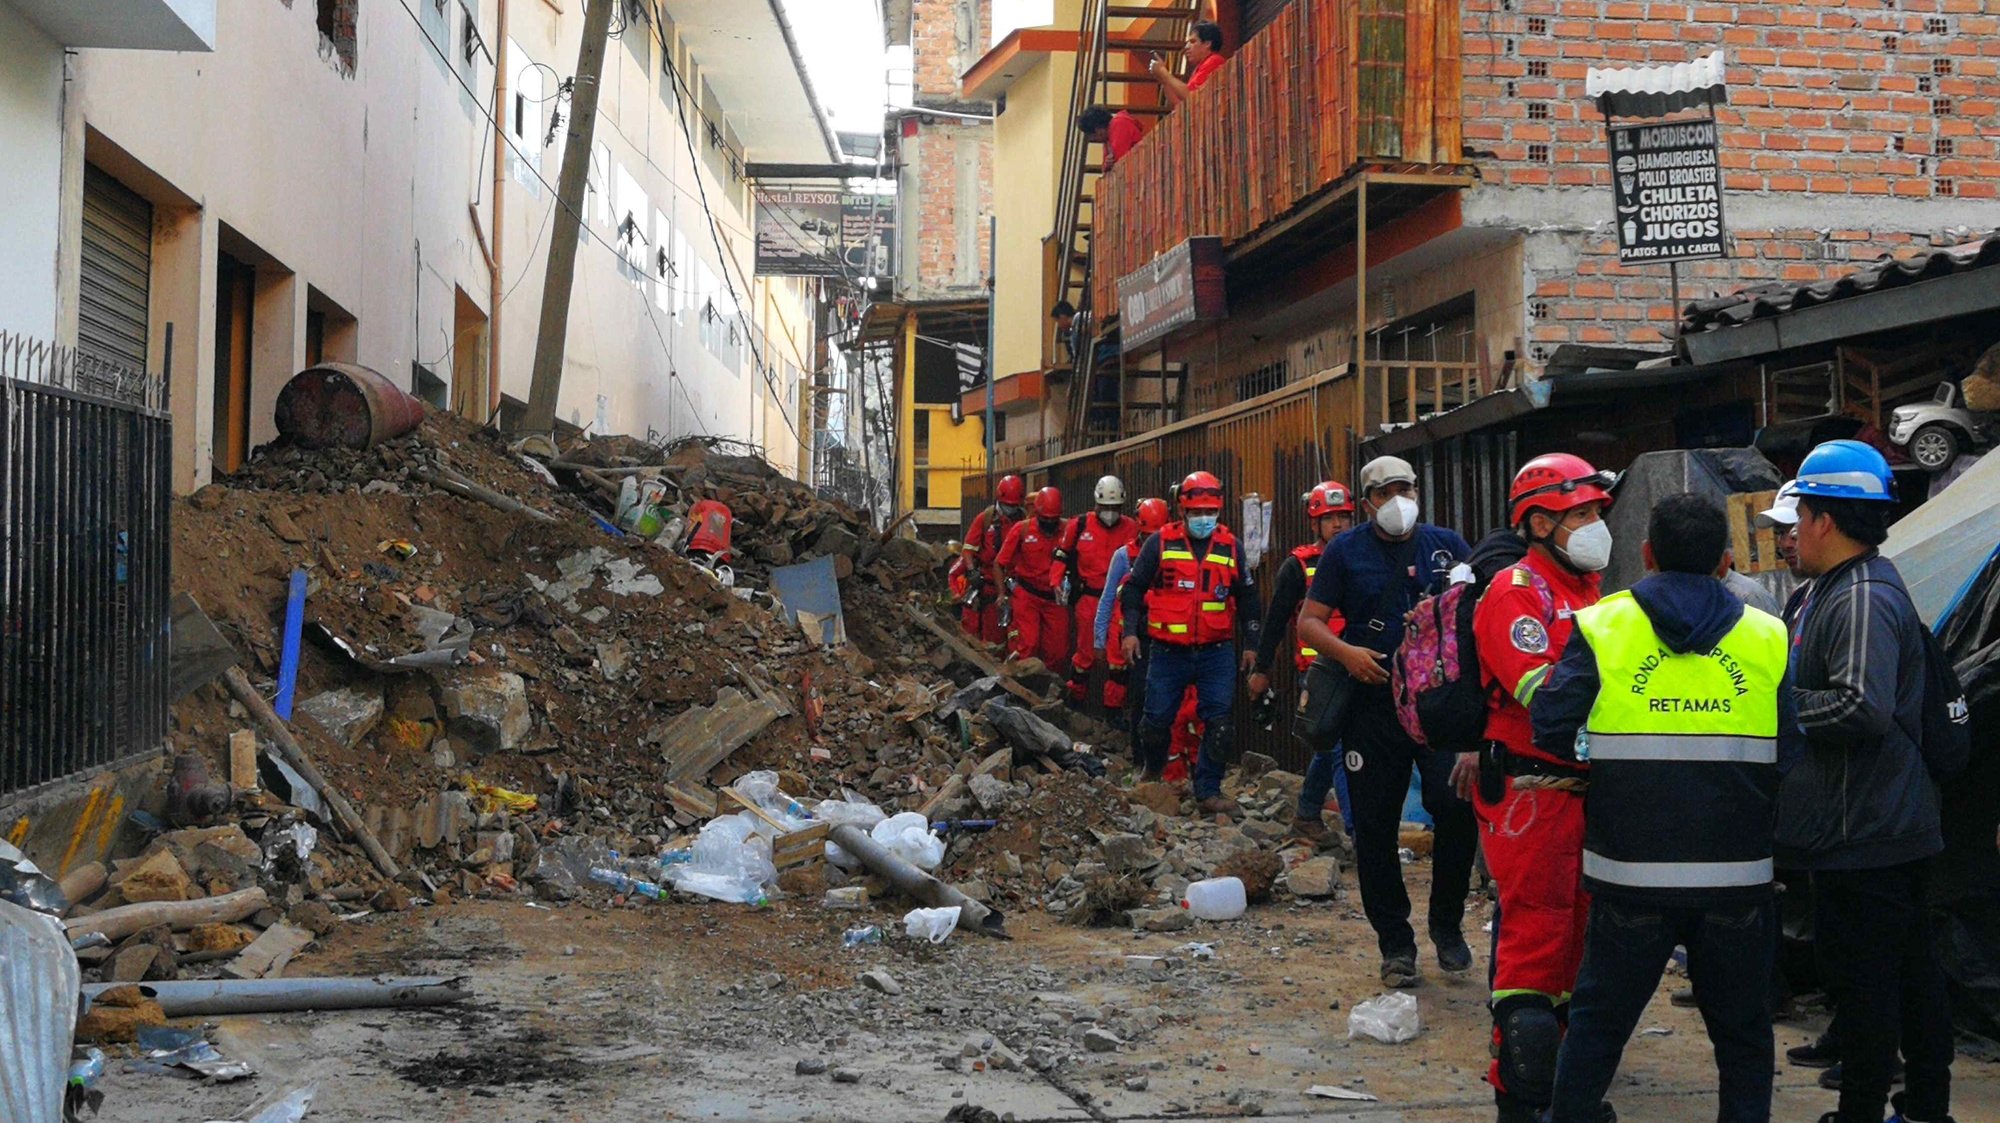 epa09827816 Rescue teams gather near a landslide on a street in Retamas, in Pataz, Peru, 15 March 2022. Seven people are missing and about sixty houses are buried in the Peruvian province of Pataz, the National Police reported. Peruvian President Pedro Castillo posted on Twitter &#039;I have arranged for the head of the National Civil Defense Institute and the Minister of Defense to go to the area affected by the landslide in the province of Pataz, in the La Libertad region. We will support the affected families and coordinate various actions with the local authorities,&#039;.  EPA/Audias Torres Coronel